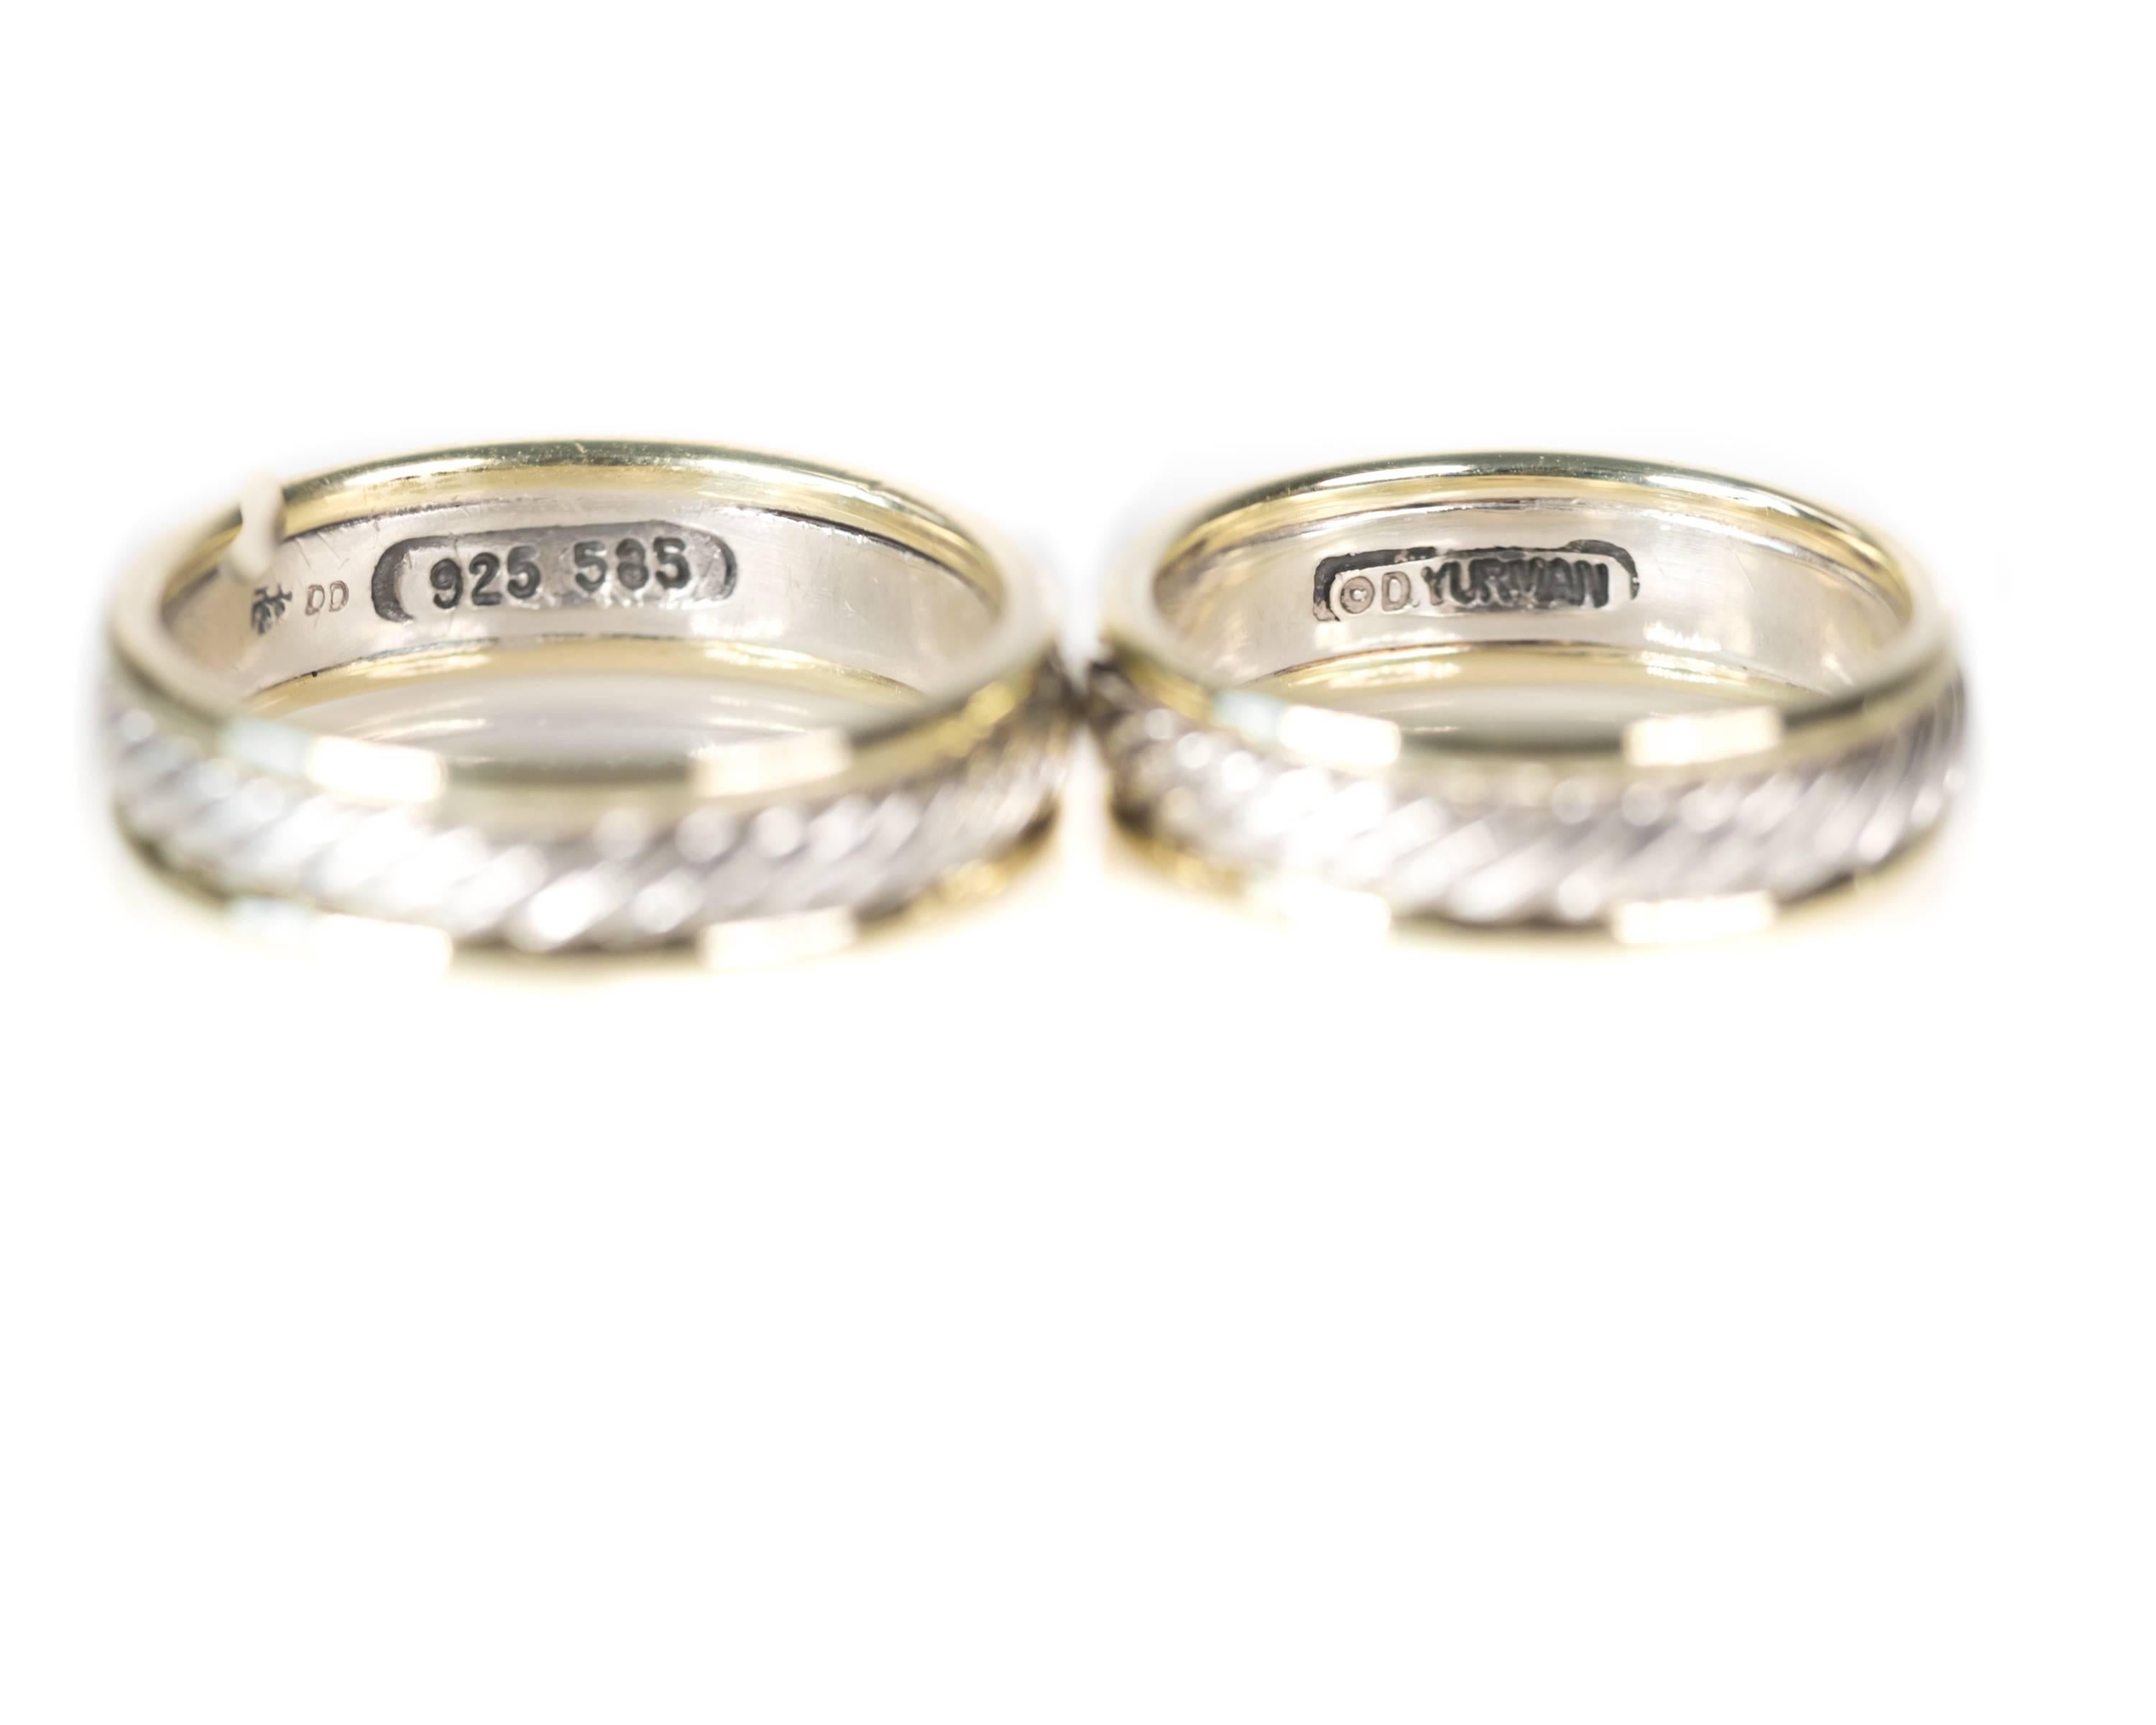 David Yurman Cable Wedding Bands in 14 Karat Gold, Sterling Silver, Set of Two 2